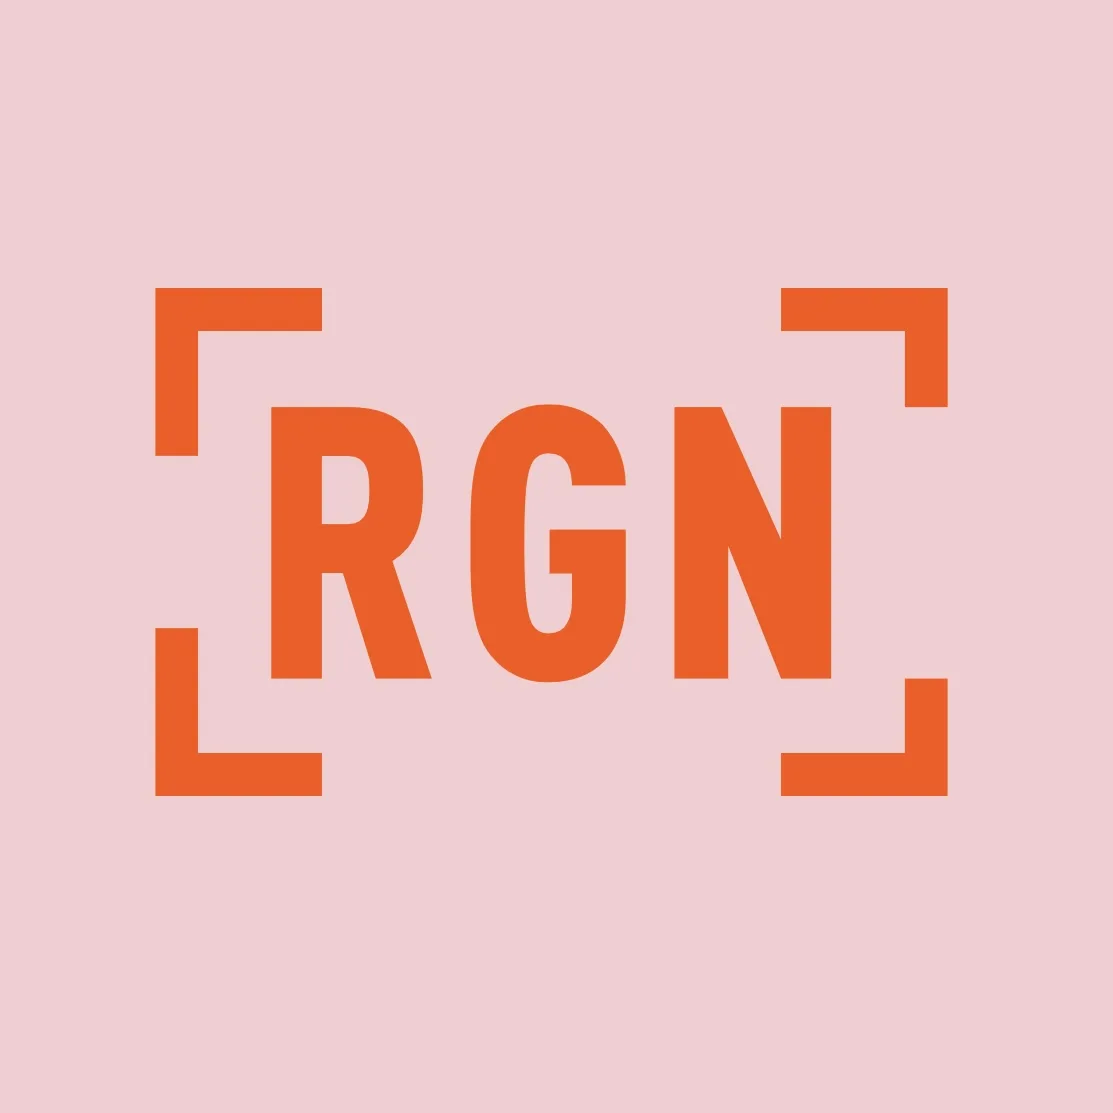 RGN